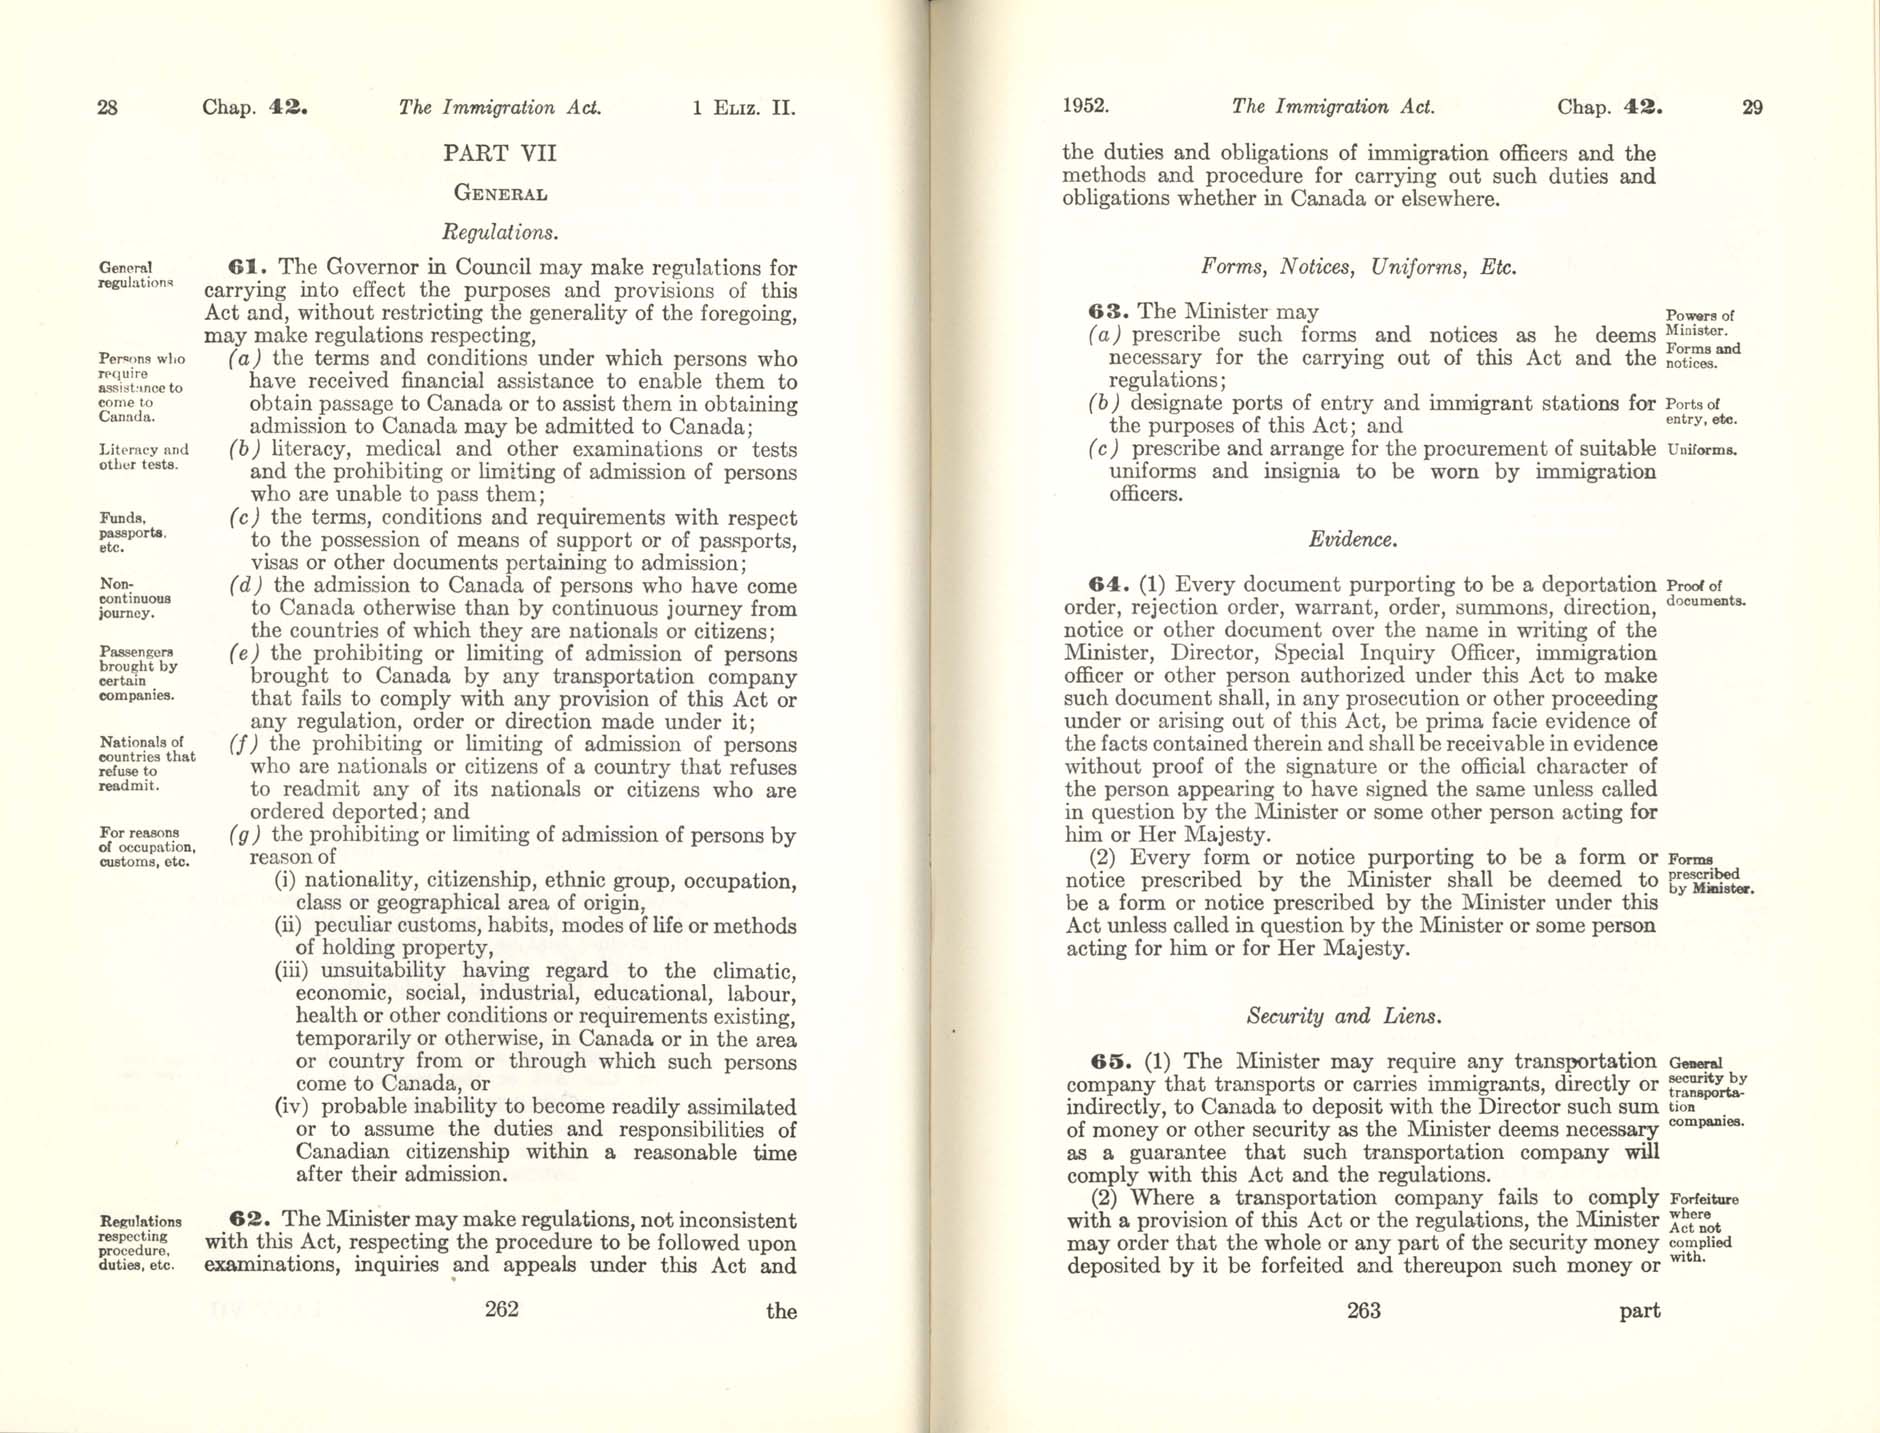 CHAP 42 Page 262, 263 Immigration Act, 1952